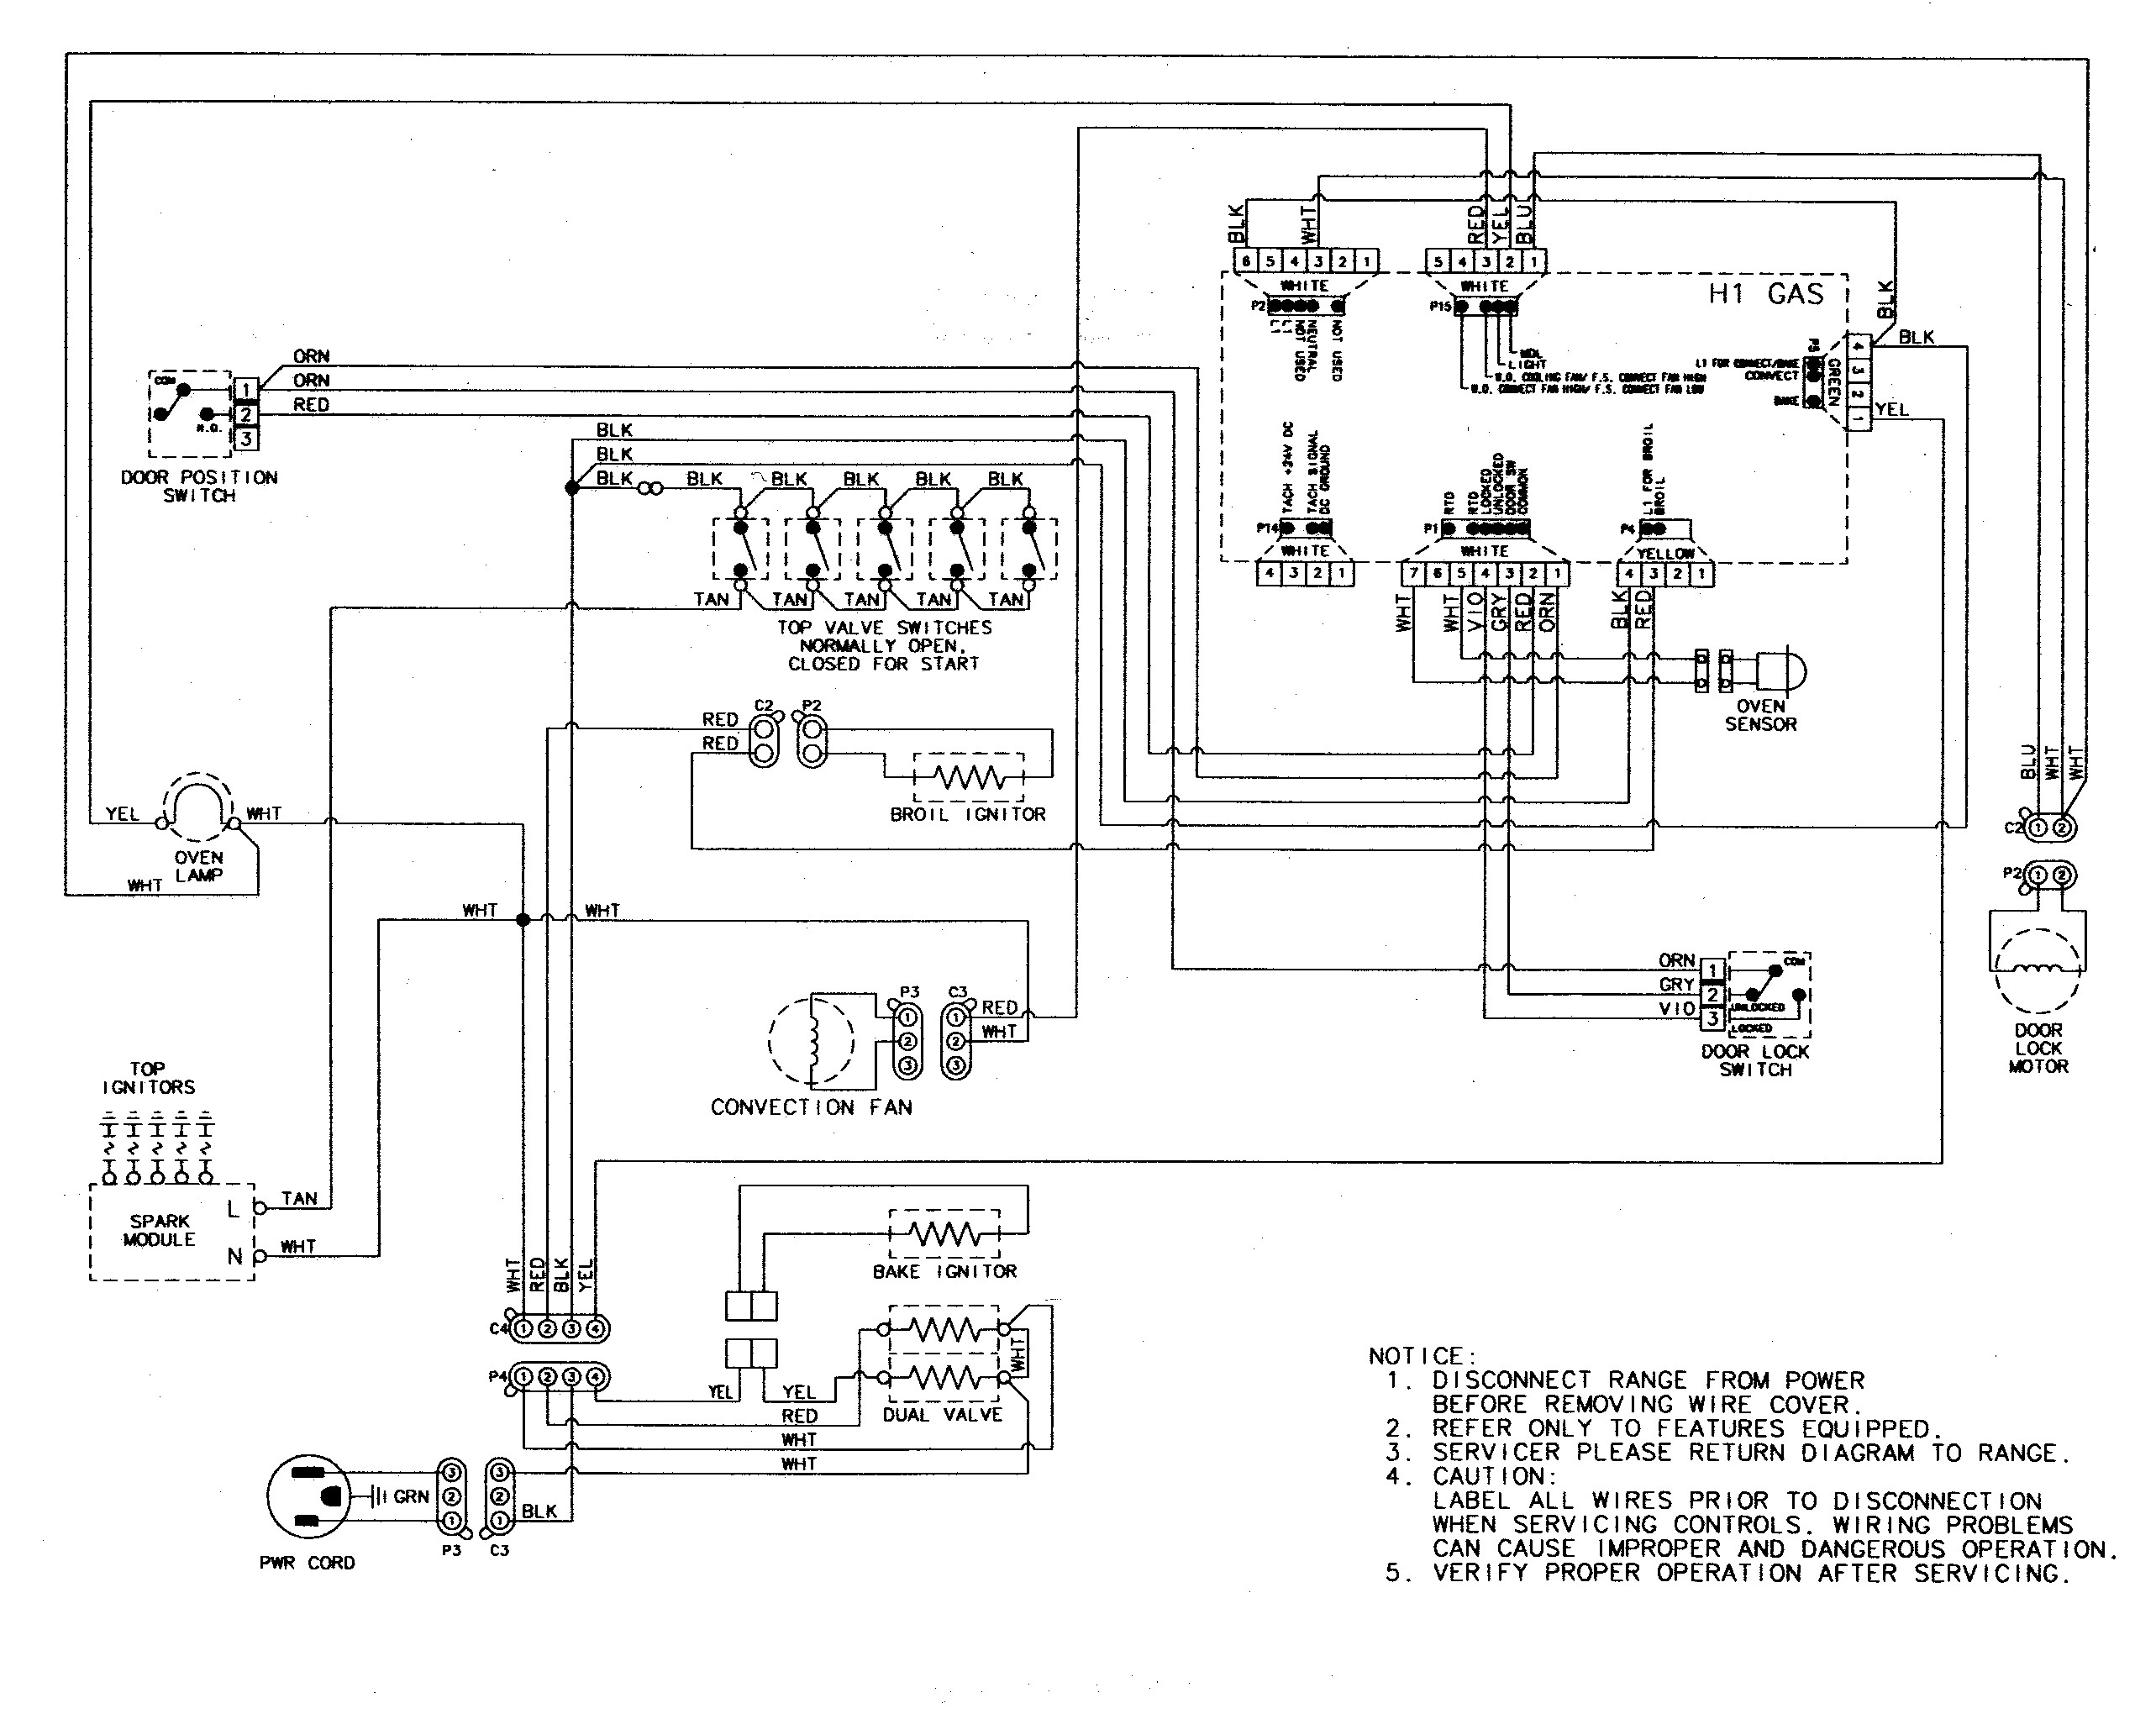 Wiring Diagram Whirlpool Gas Dryer Schematic For Simple Electric Range